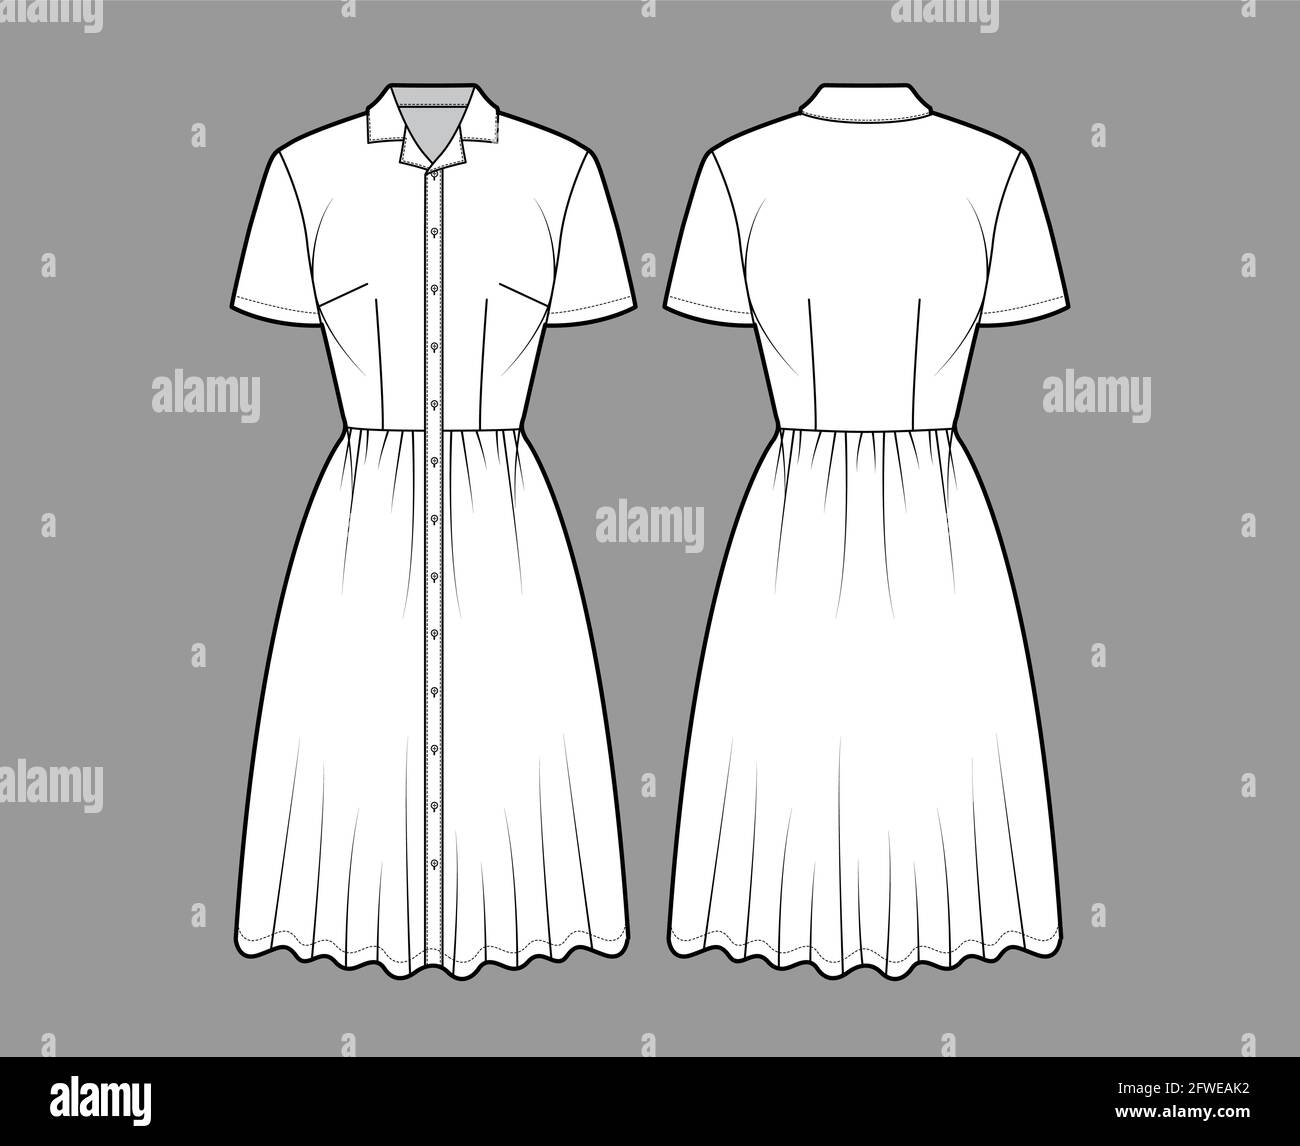 Dress shirt technical fashion illustration with short sleeves, camp collar, fitted body, knee length full skirt, button closure. Flat apparel front, back, white color style. Women, unisex CAD mockup Stock Vector